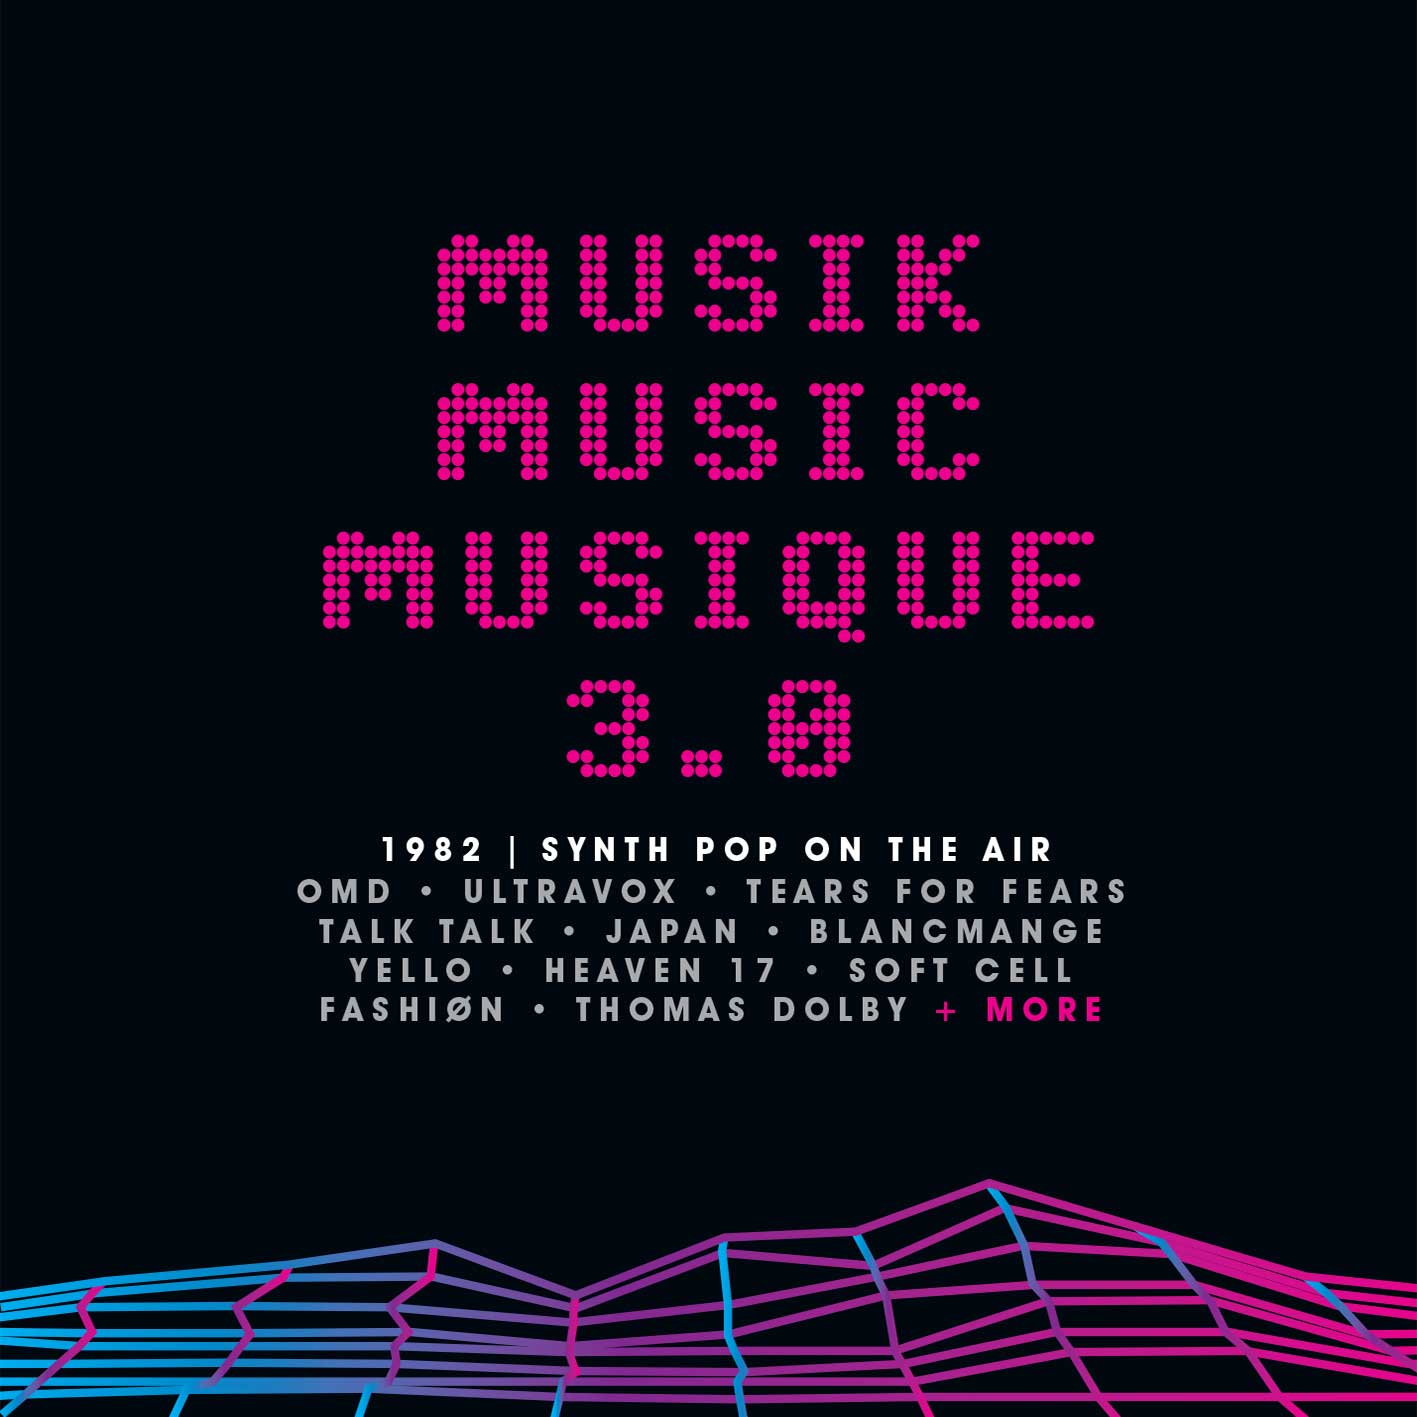 Musik Music Musique 3.0 – 1982 Synthpop On The Air, 3CD Box Set